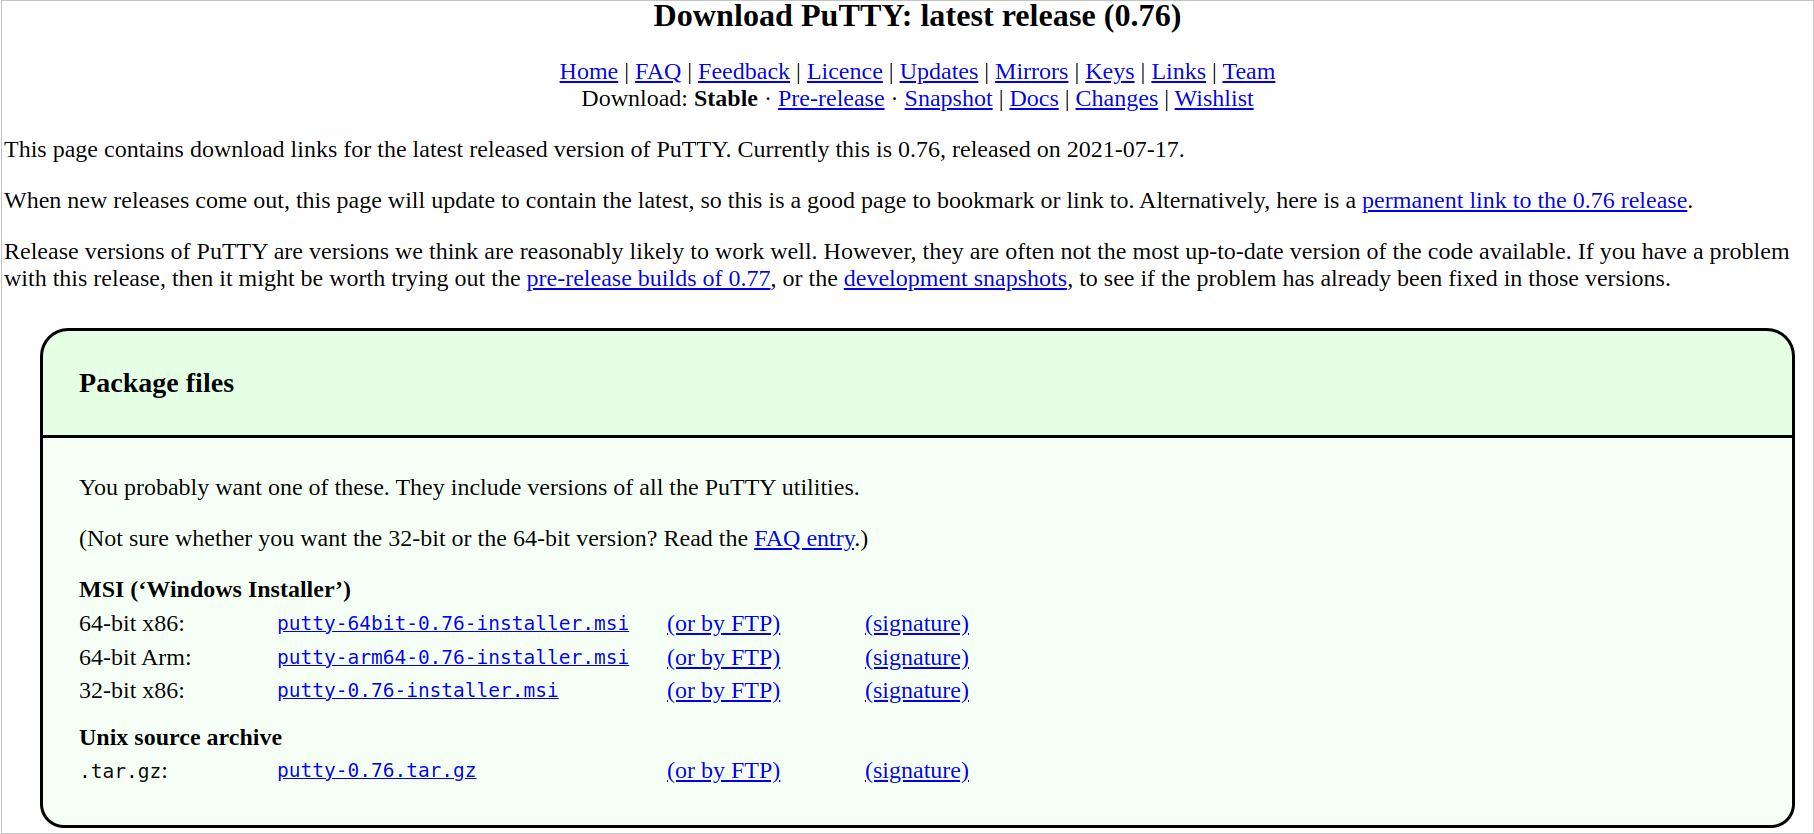 Downloading PuTTY